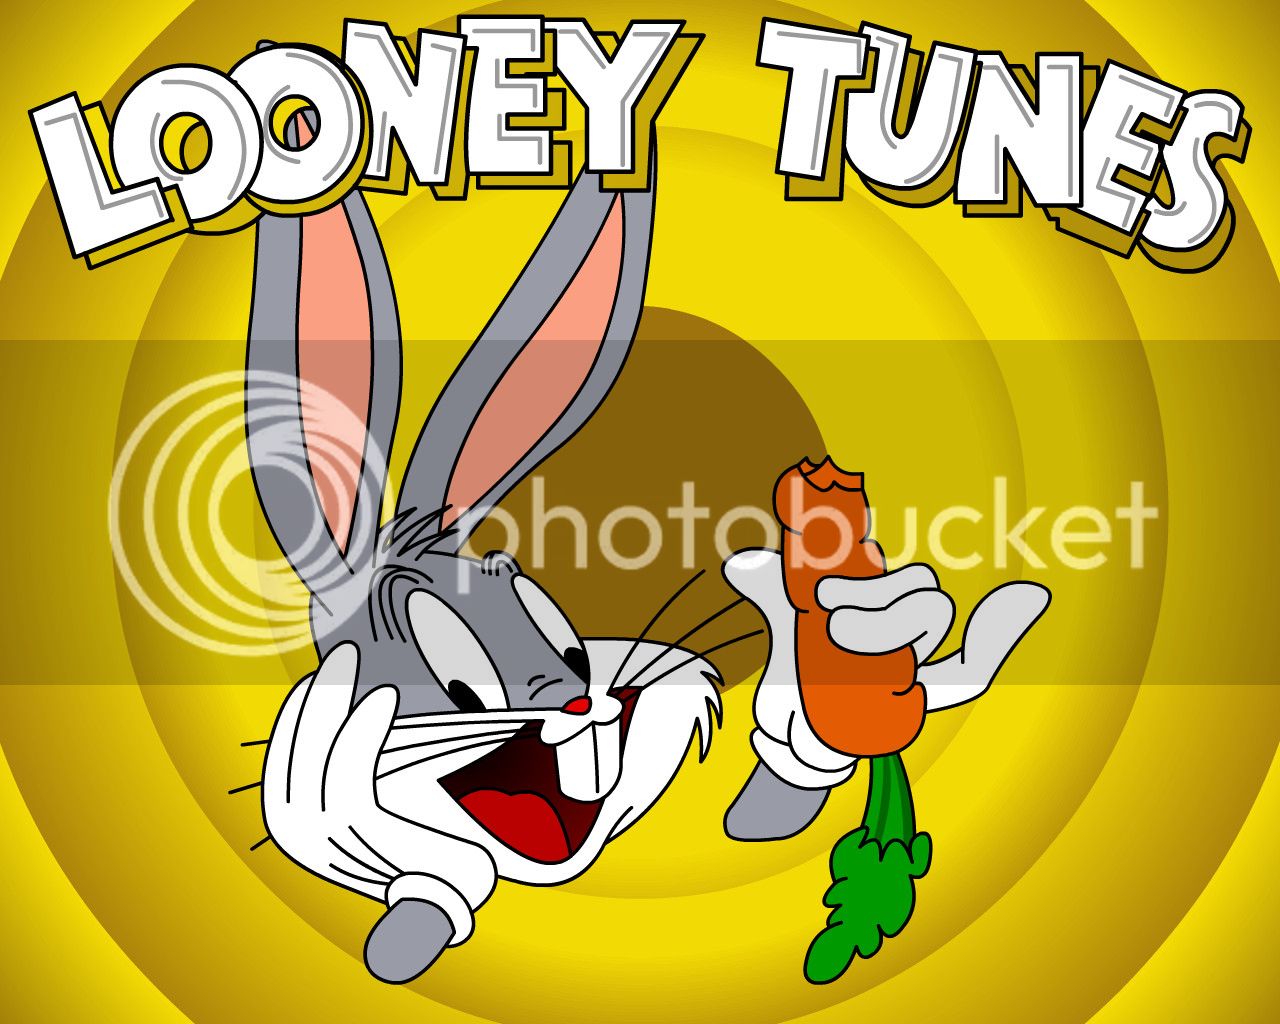 Looney_Tunes___Bugs_Bunny___WP_by_Sykonist.jpg